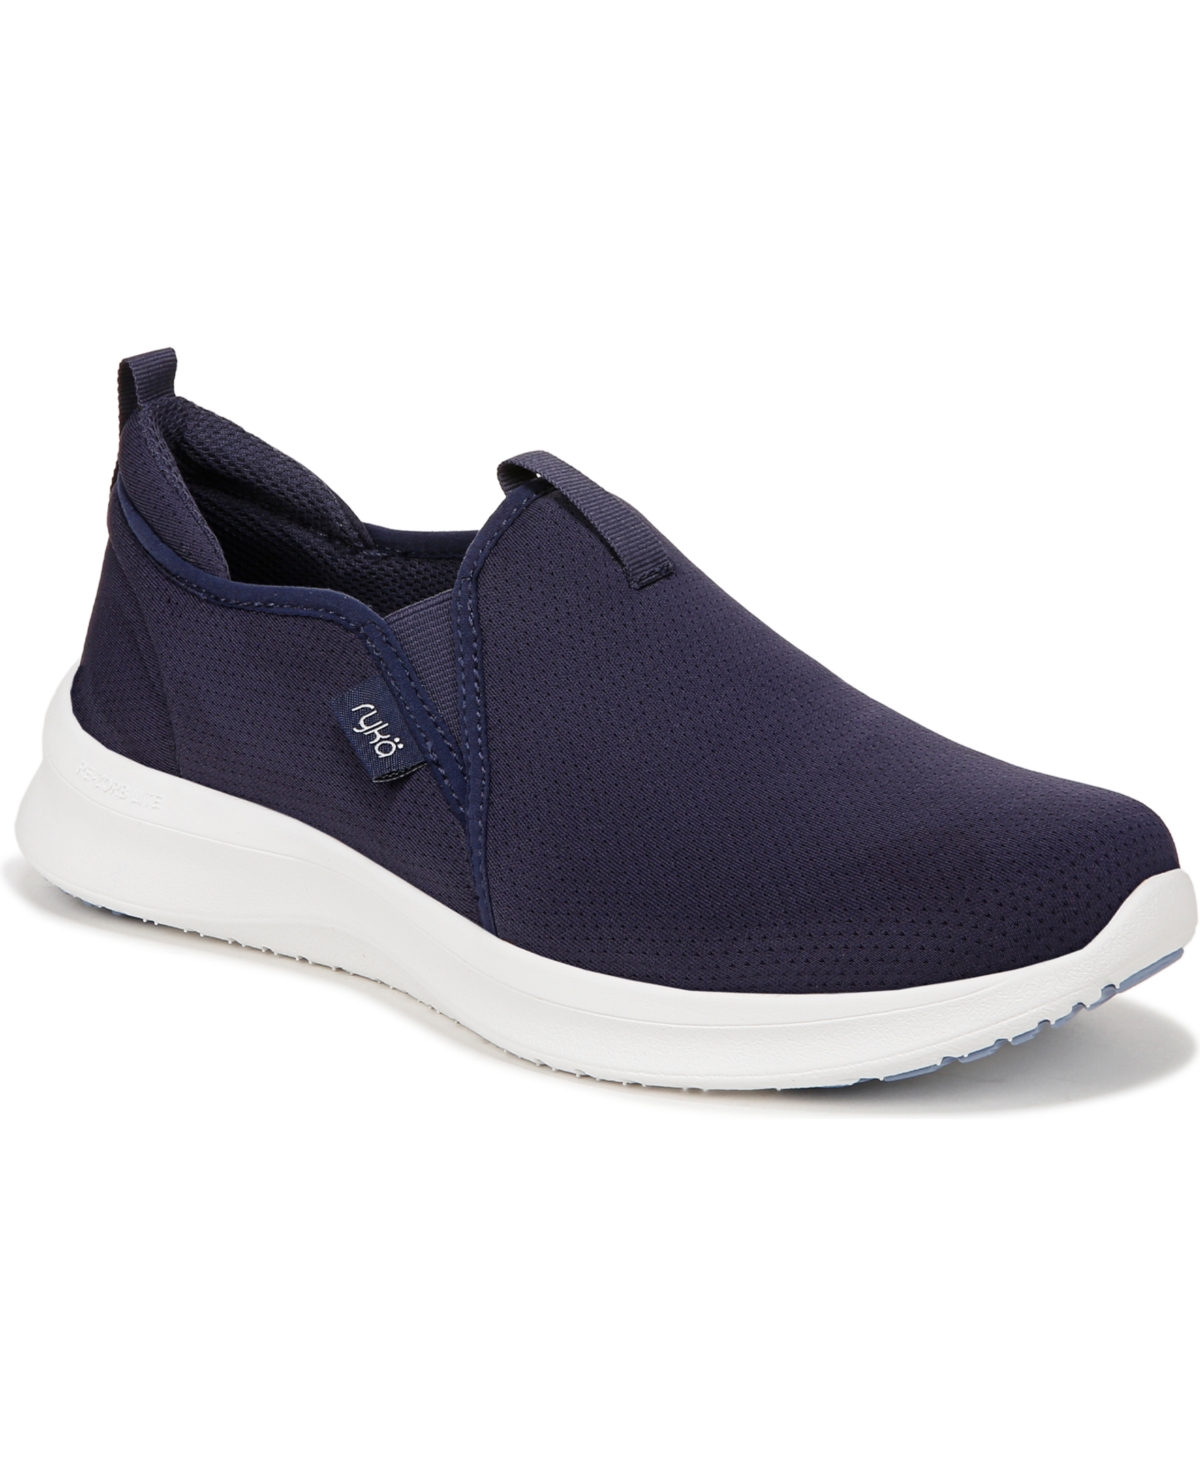 Women's Revive Slip On Sneakers - Academy Blue Mesh Fabric